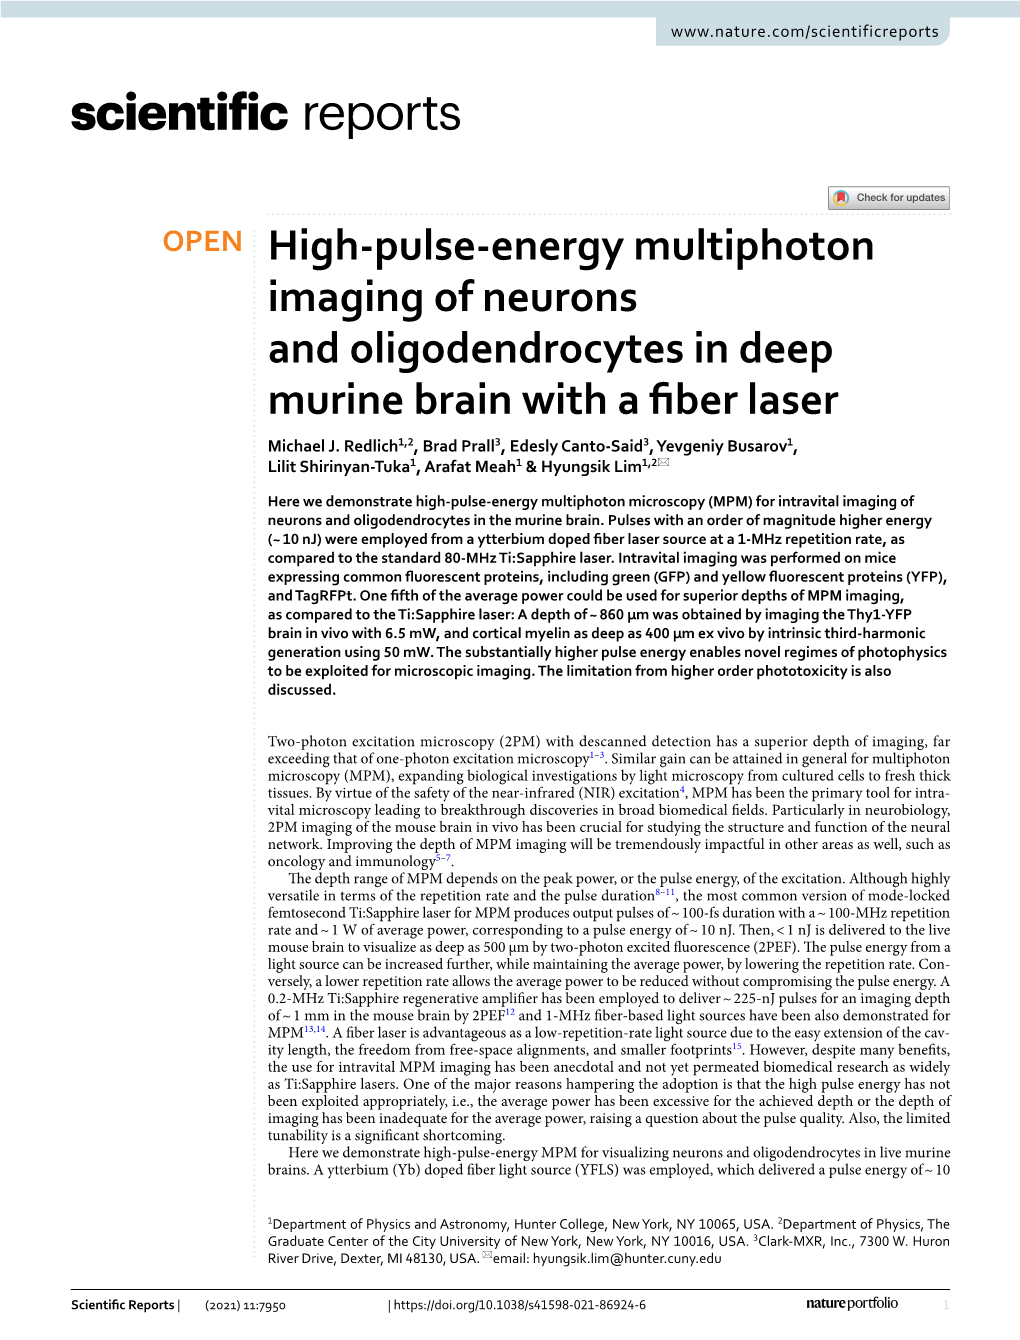 High-Pulse-Energy Multiphoton Imaging of Neurons and Oligodendrocytes in Deep Murine Brain with a Fiber Laser